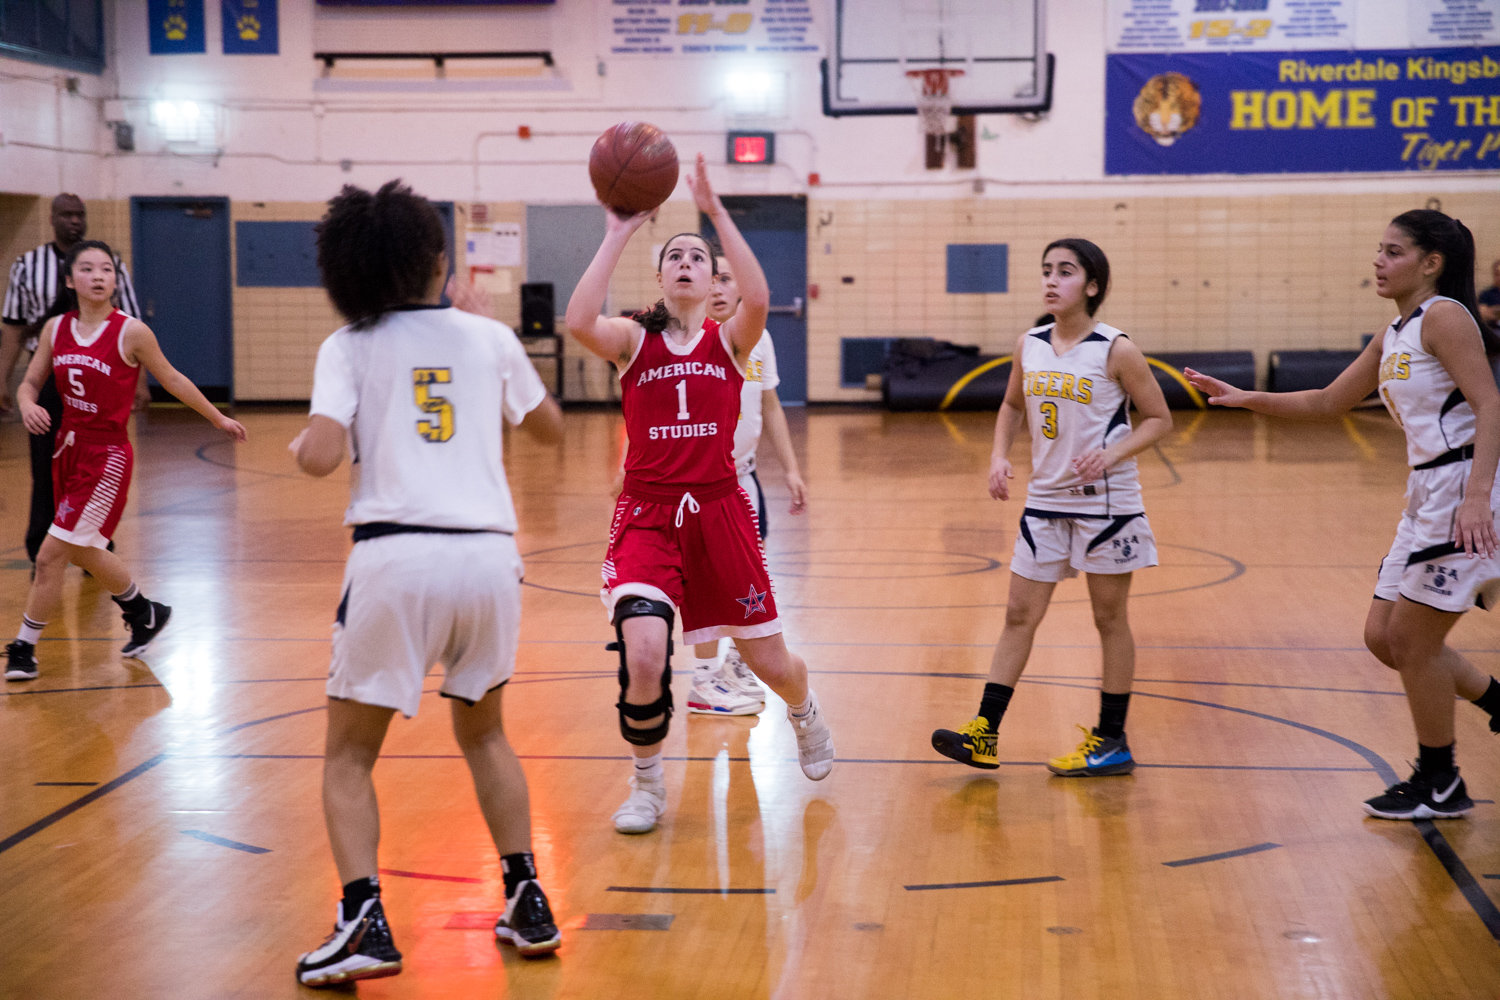 American Studies senior Jacqui Harari scored 12 points and pulled down six rebounds in the Senators’ PSAL playoff-opening win over Career Health Academy.